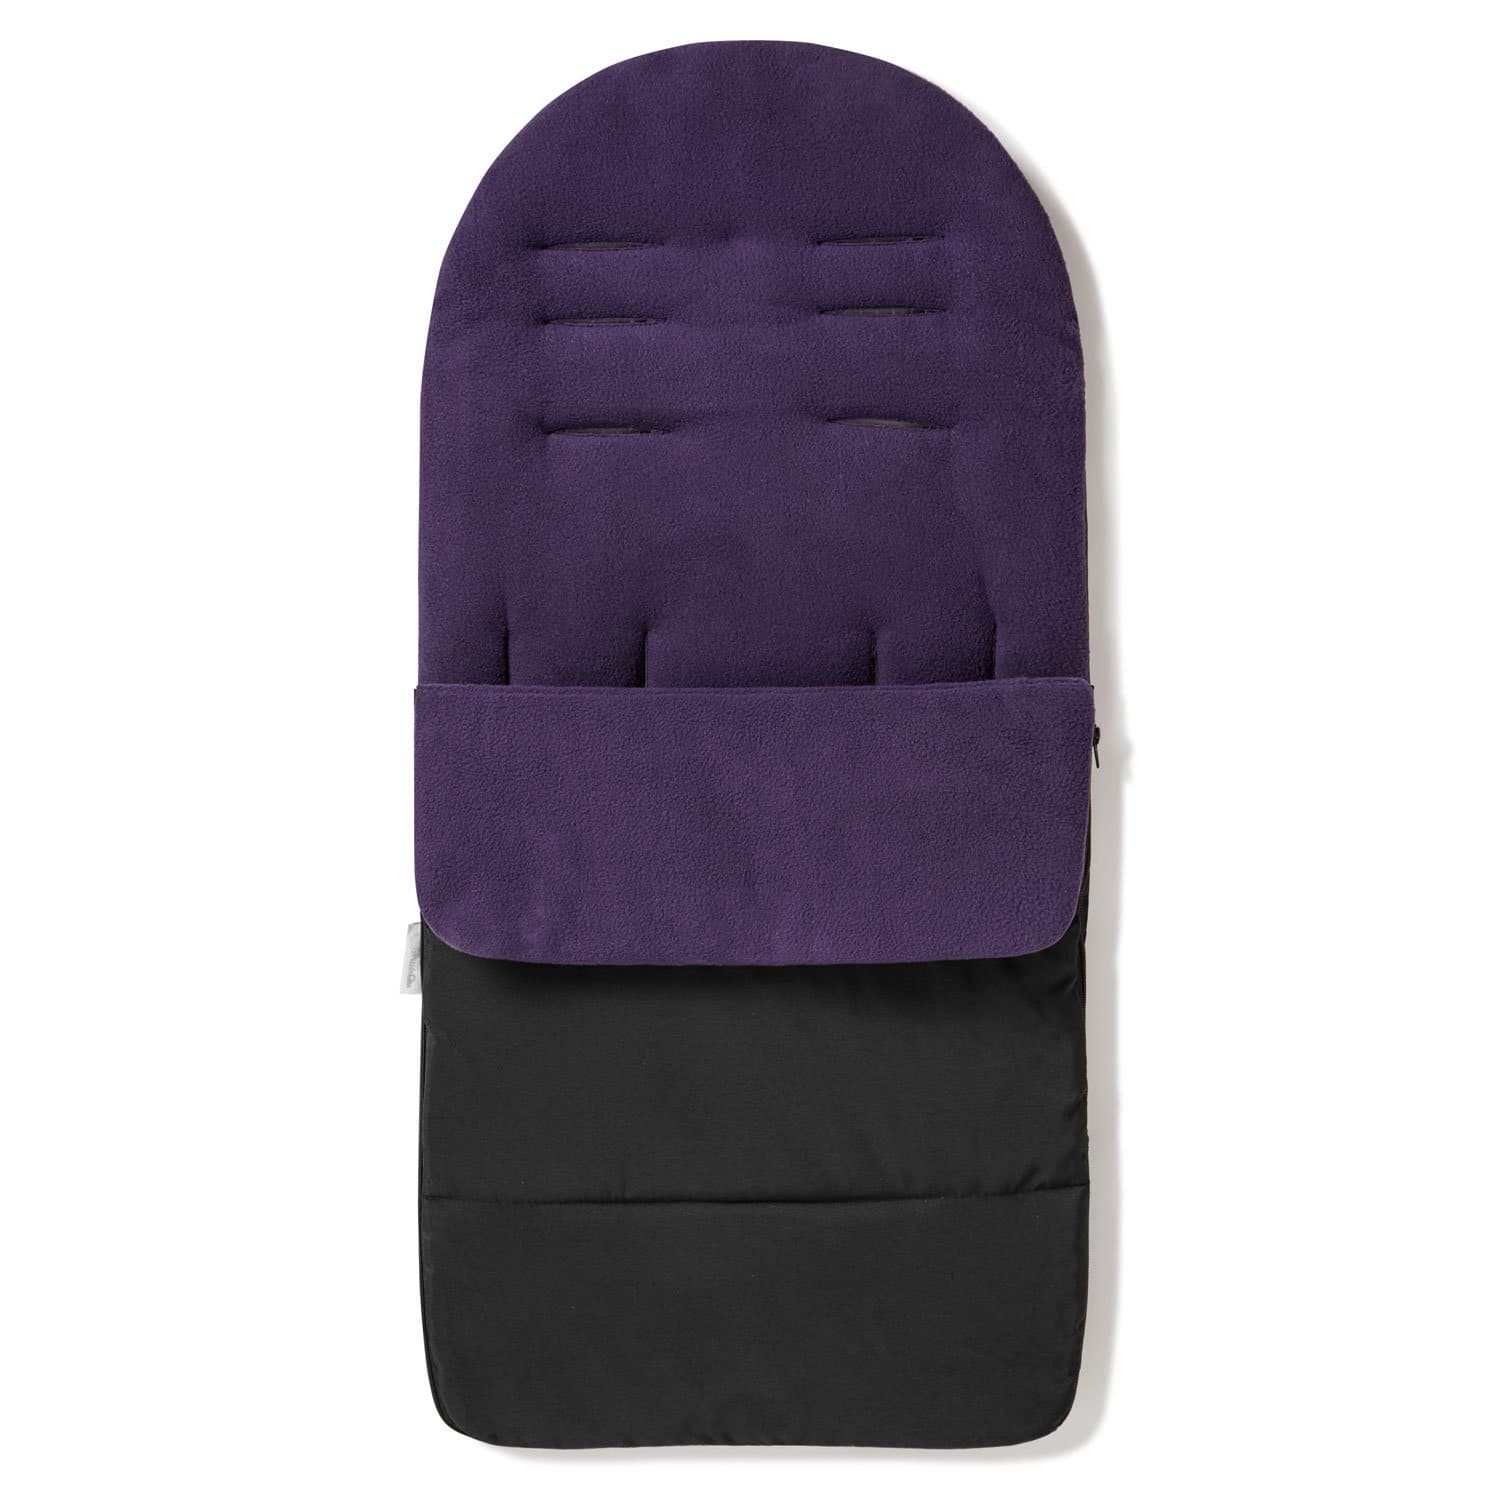 Premium Footmuff / Cosy Toes Compatible with Gesslein - Plum Purple / Fits All Models | For Your Little One